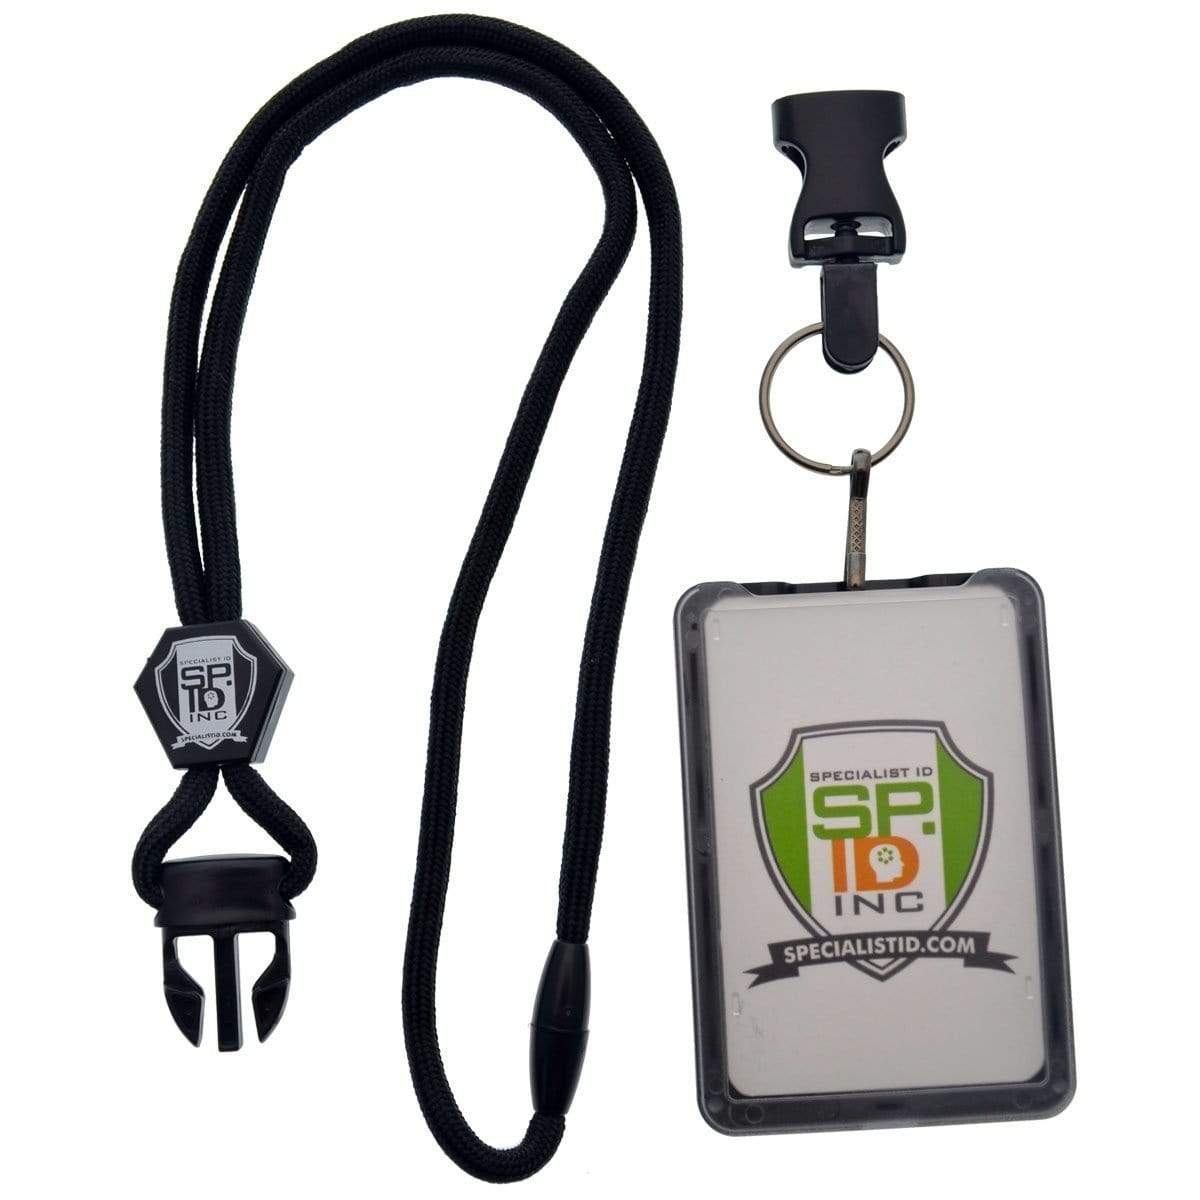 Ahobson ID Card Badge Holder with Heavy Duty Lanyard for Key ID Card Name Tag Credit Card Business Card Access Card Holder 1Pack